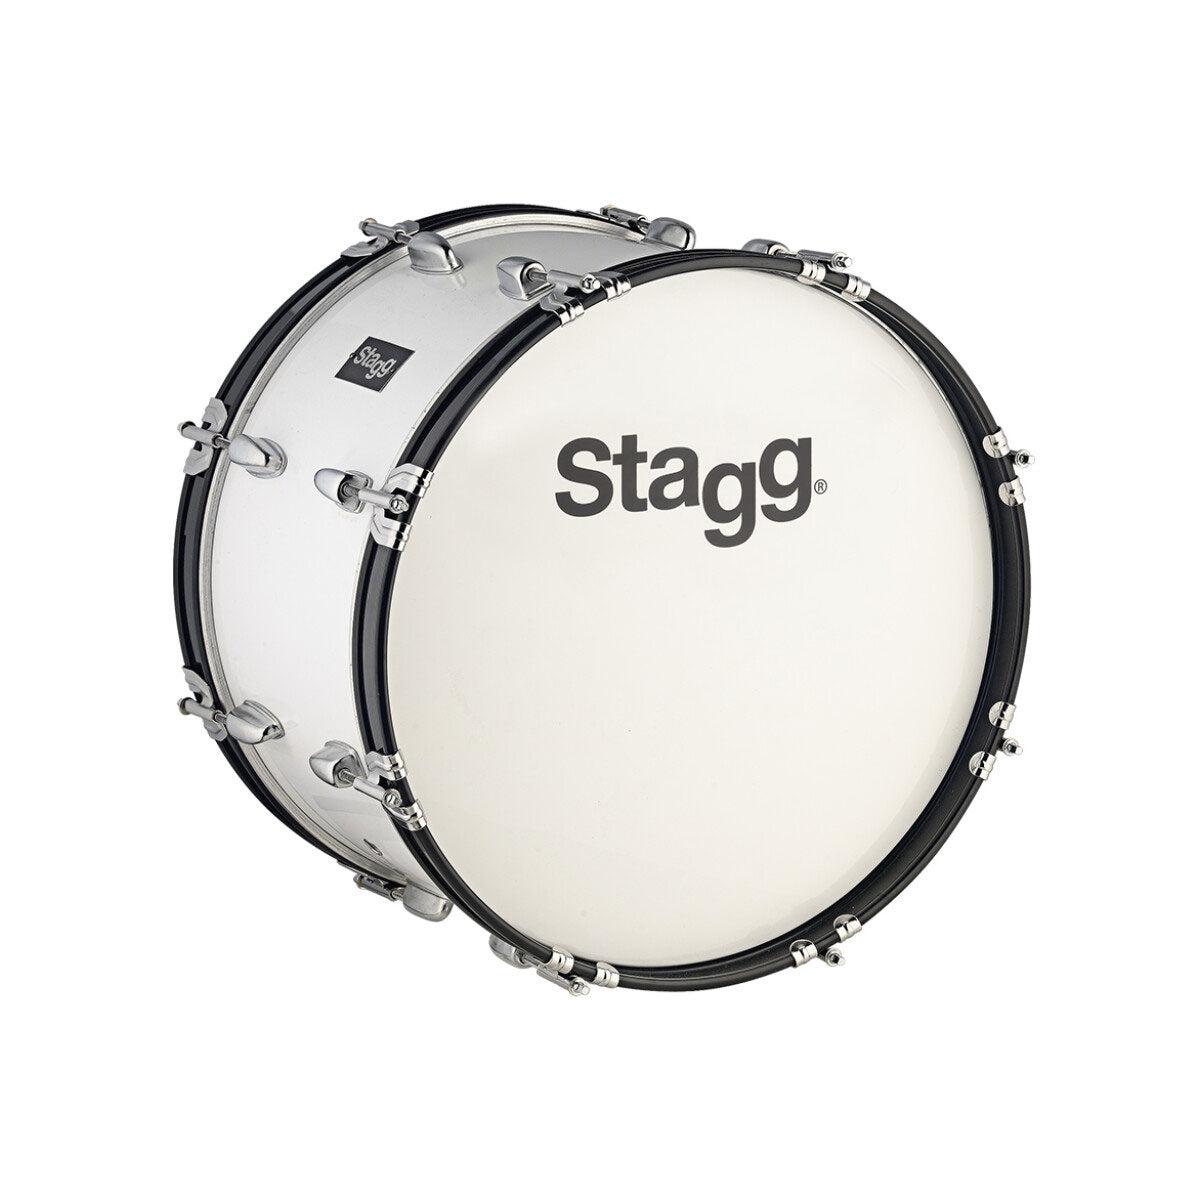 Stagg Marching Bass Drum 26" x 12" Incl Beater